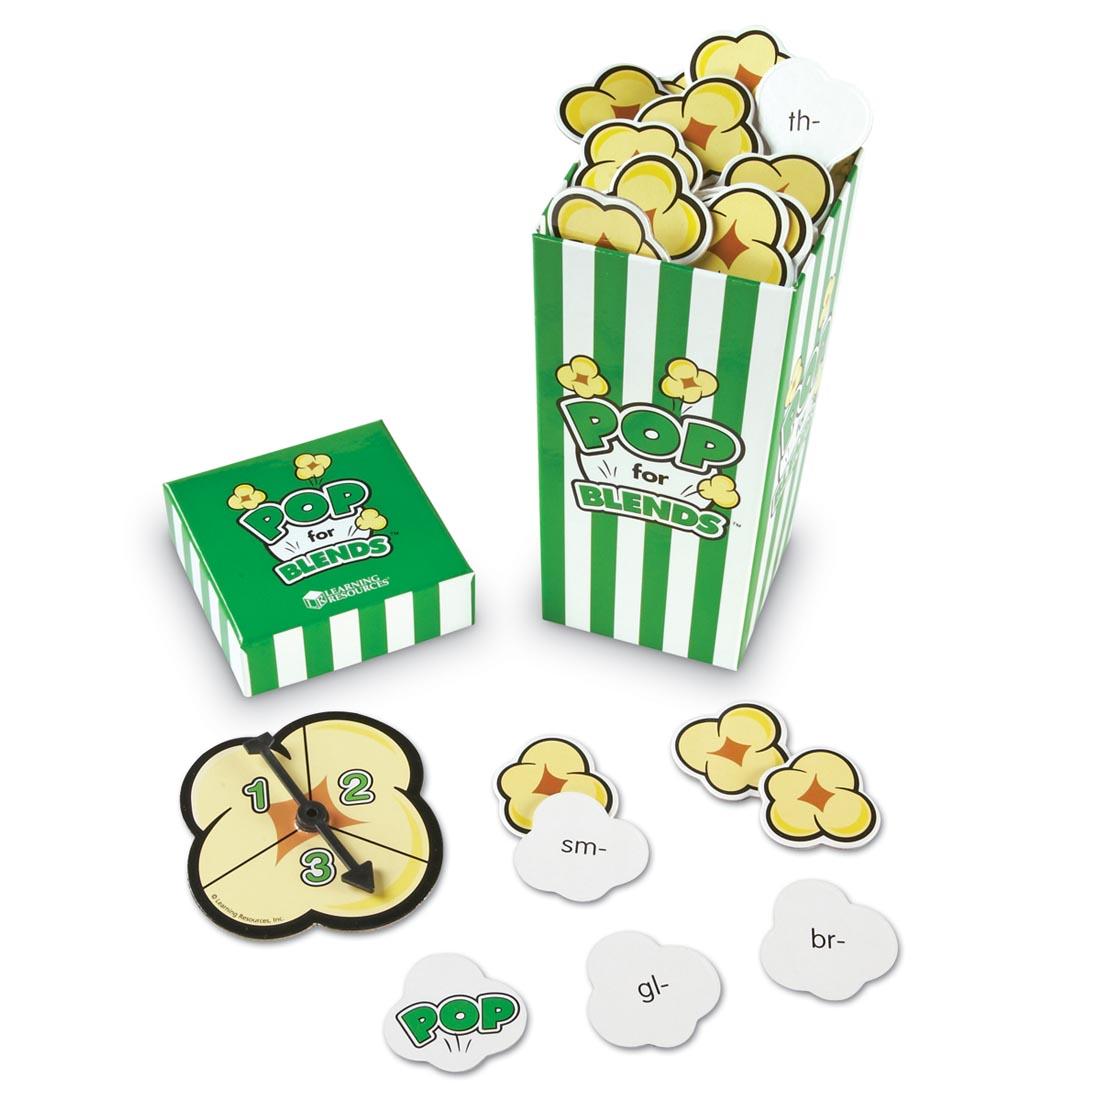 popcorn-shaped cards with consonant blends on them, in a green and white striped box